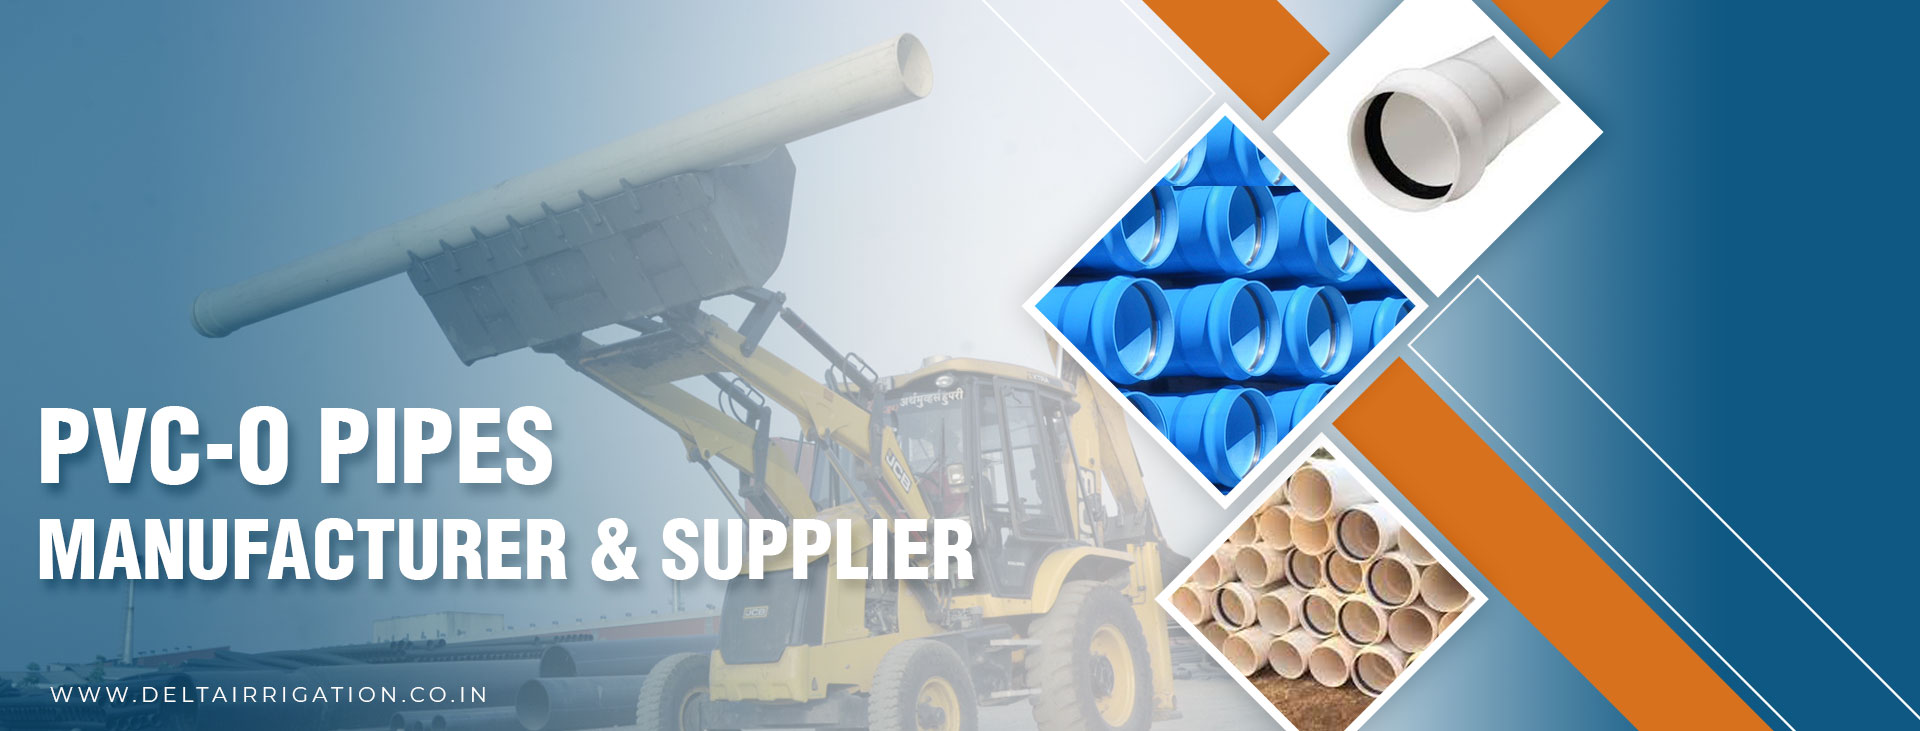 PVC-O Pipes Manufacturer & Supplier